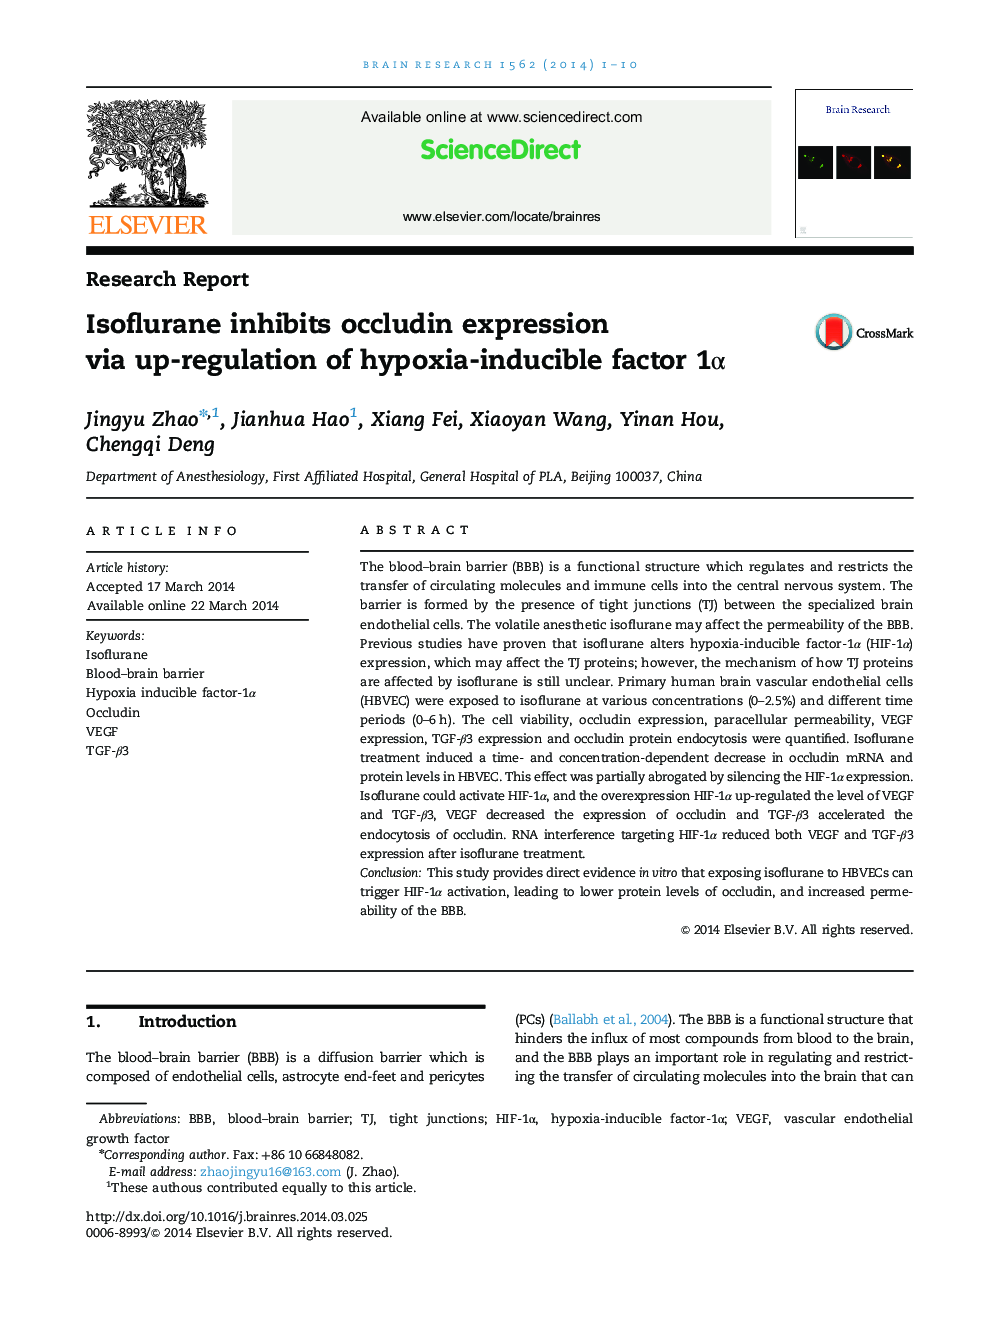 Isoflurane inhibits occludin expression via up-regulation of hypoxia-inducible factor 1α